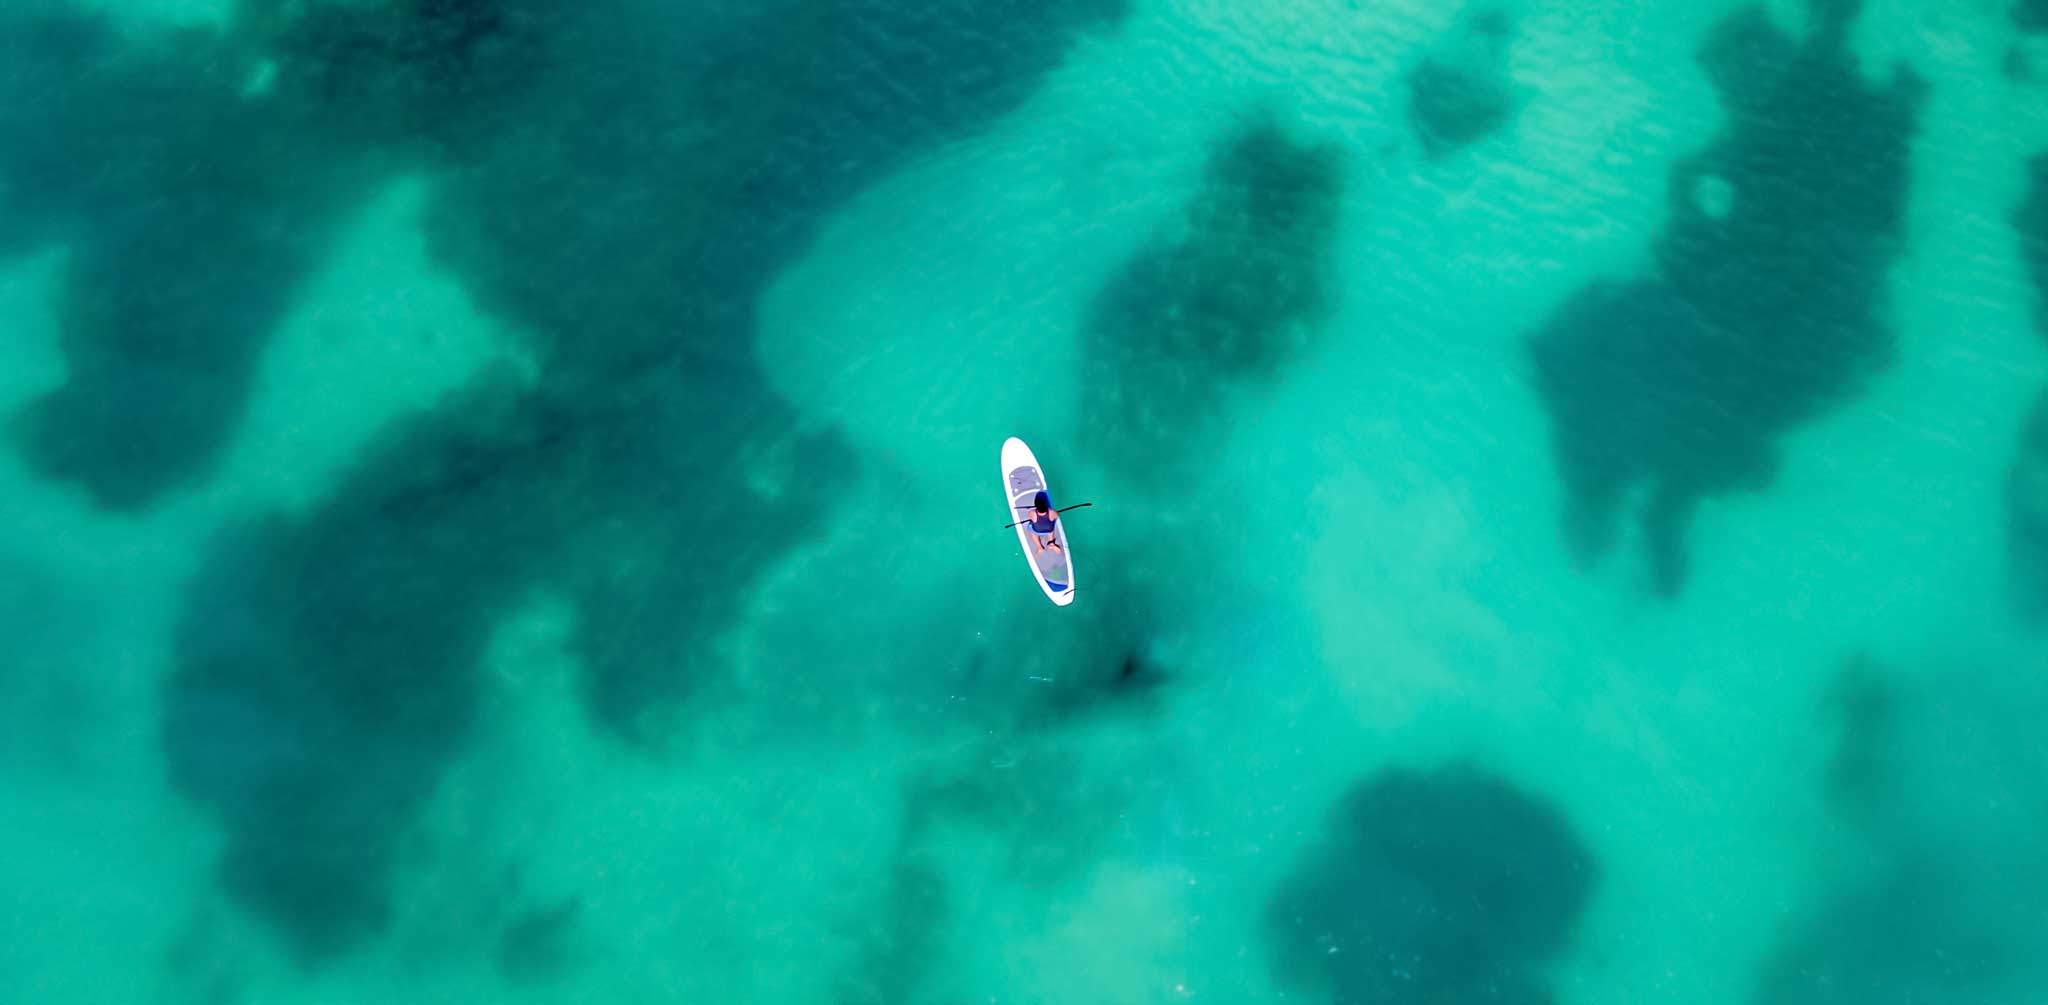 One of my favourite reasons to visit Aruba was this moment: enjoying SUP on sensational waters